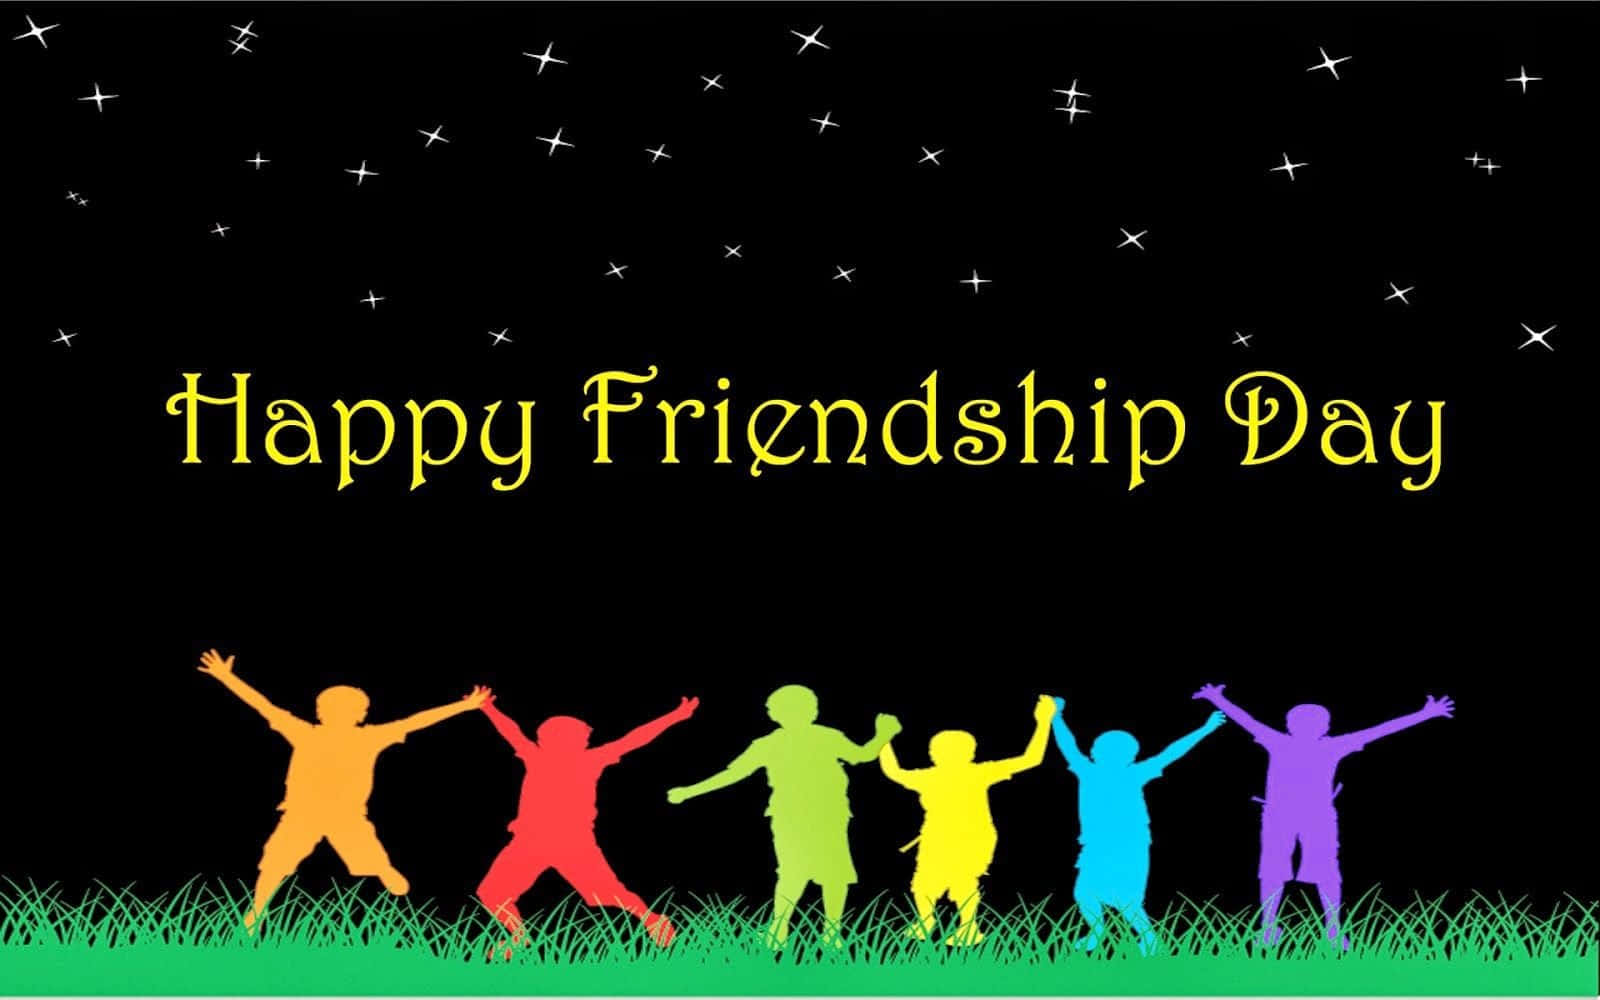 Make friends who will be around for a lifetime to celebrate Friendship Day!